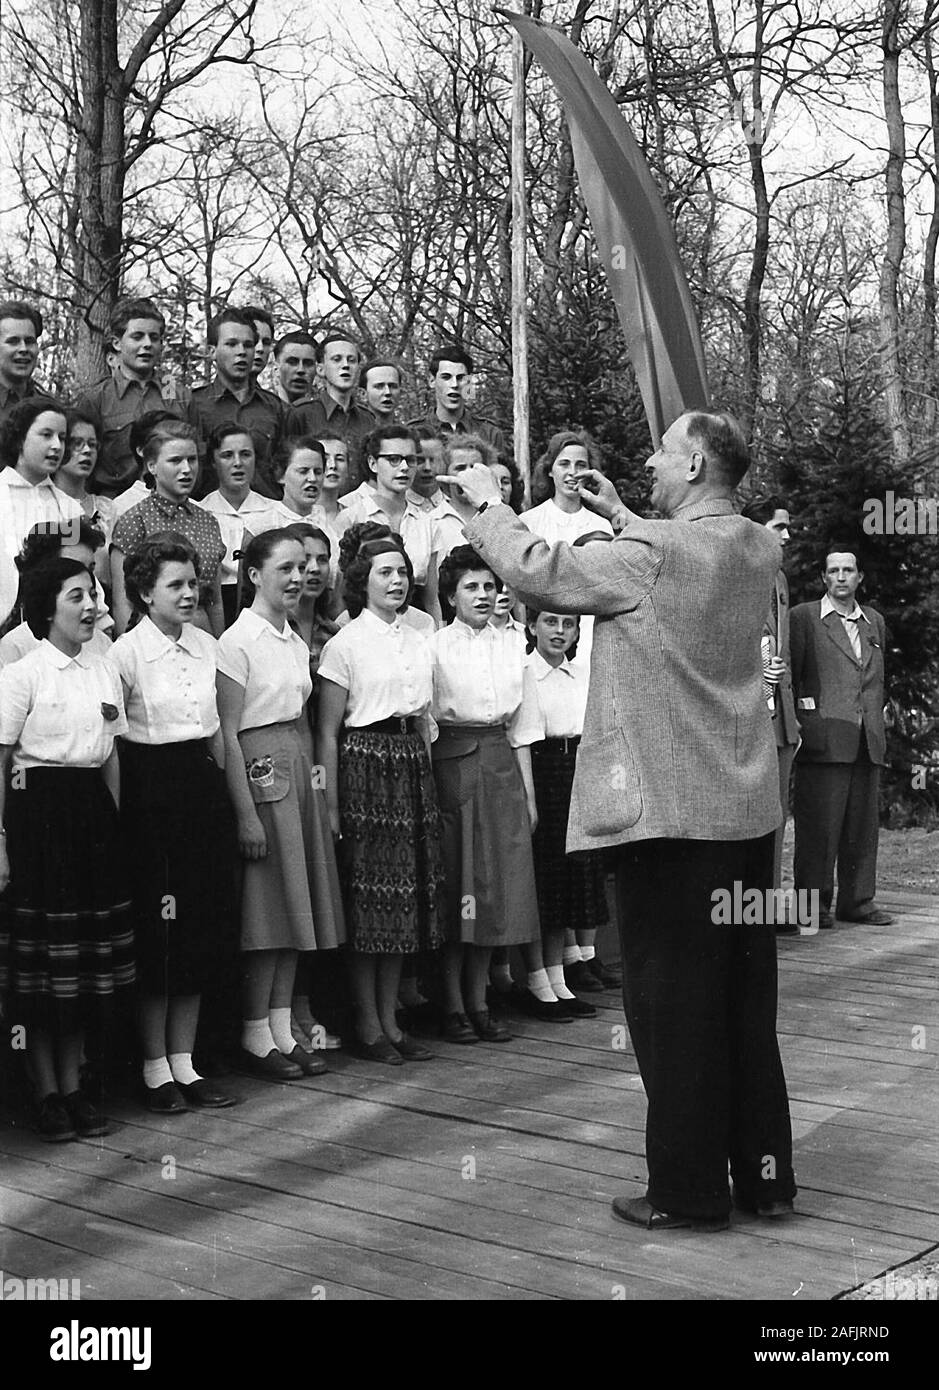 School choir of the Oberschule Fuerstenwalde at the city park Fuerstenwalde on May 1. during a performance. Picture shows the choir director and students singing. Stock Photo